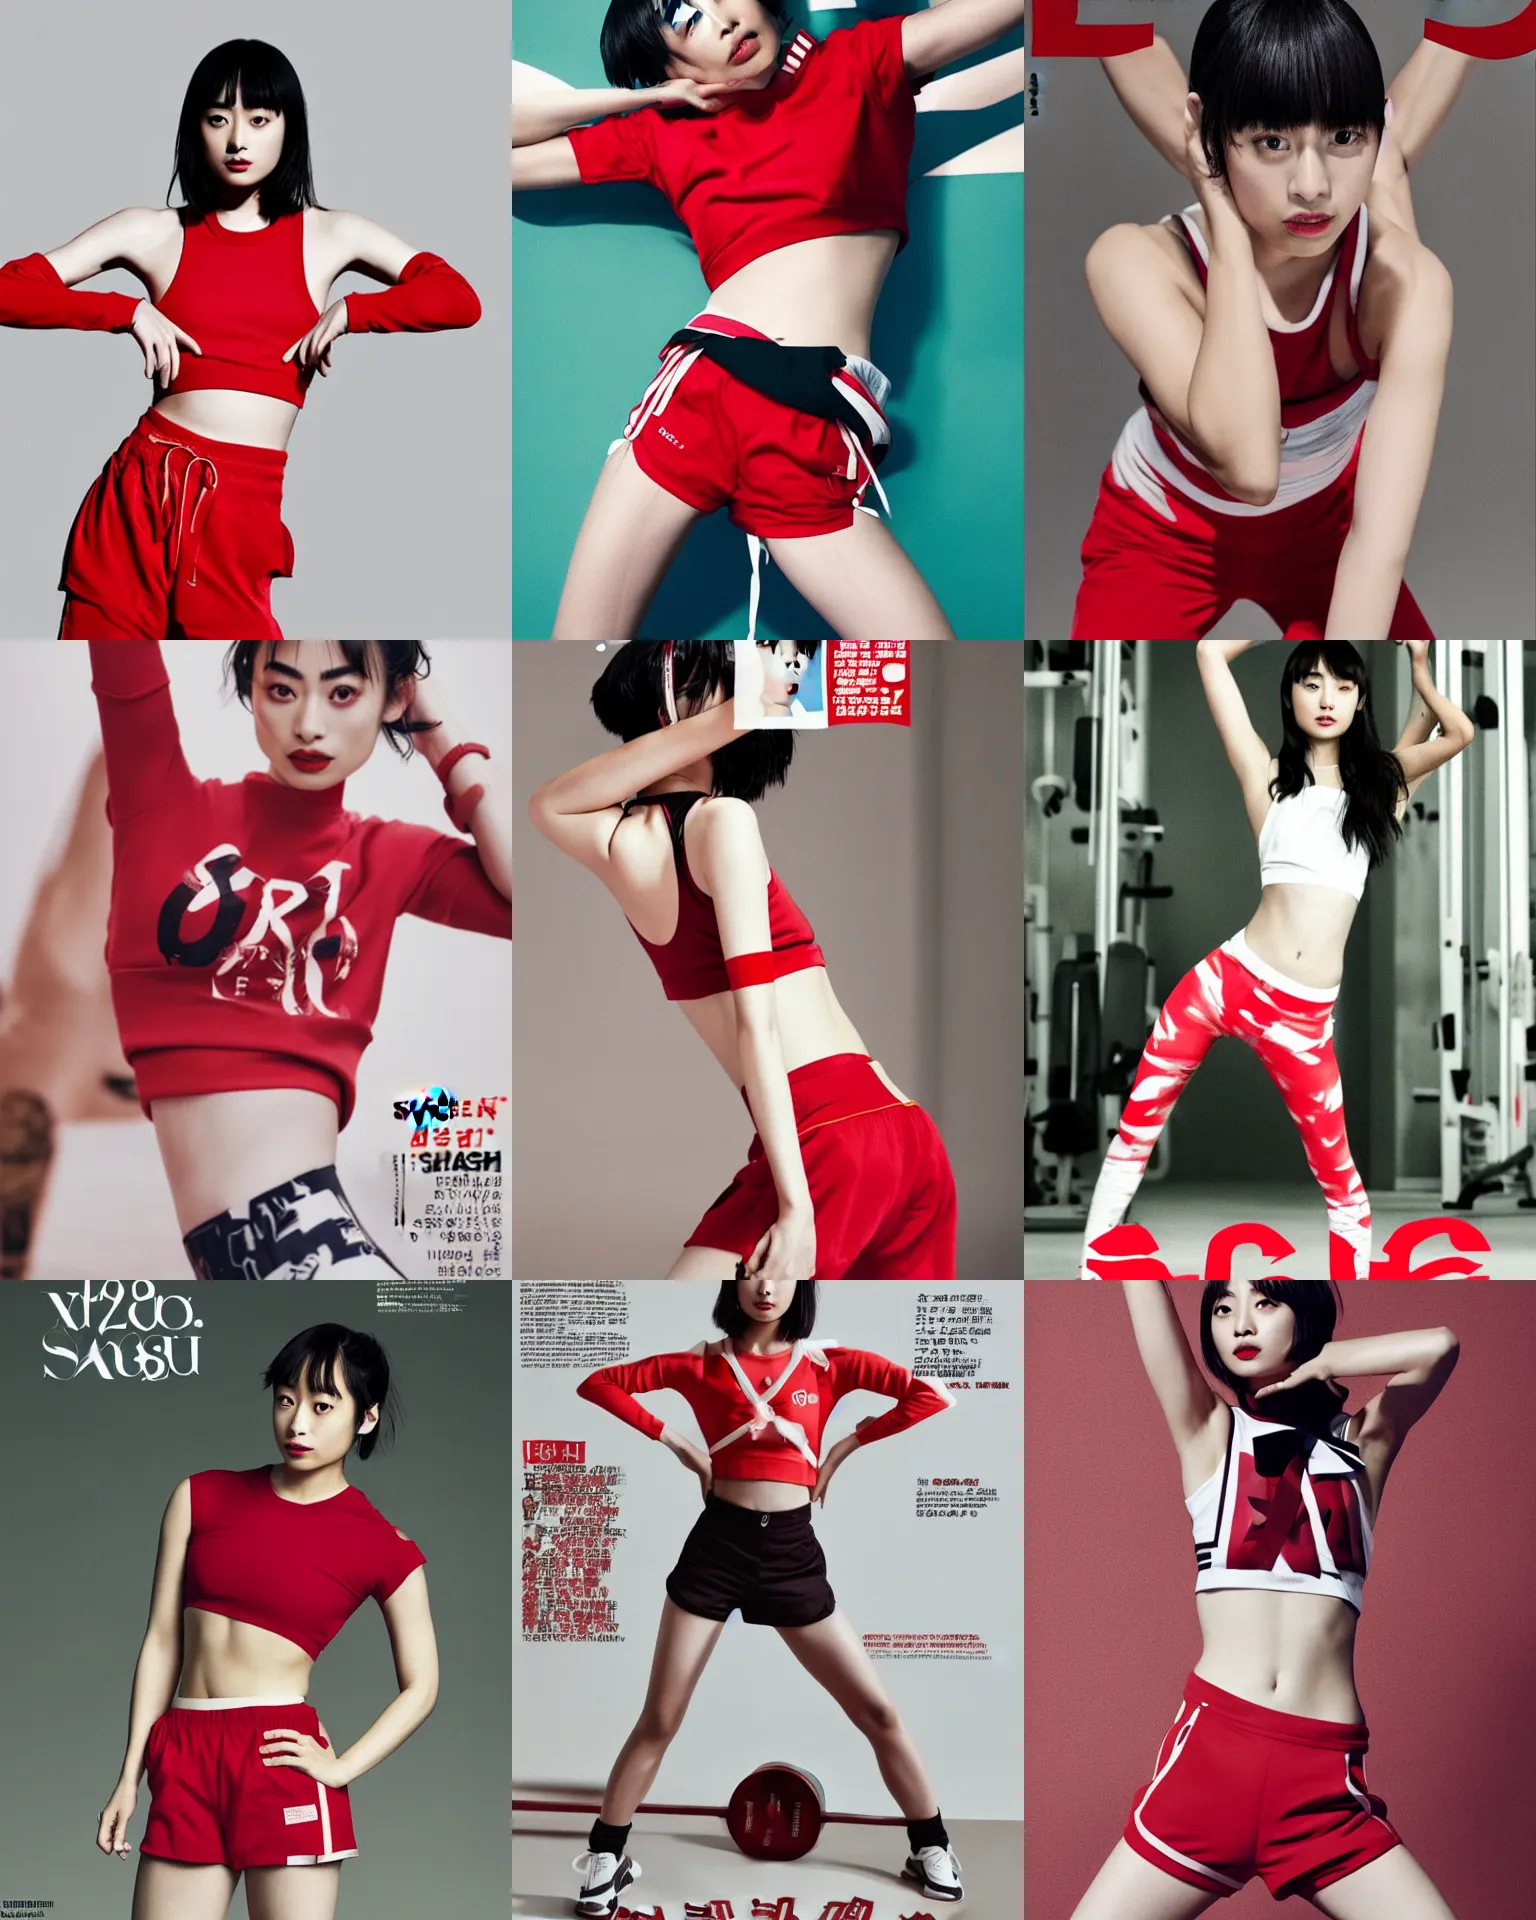 Prompt: suzu Hirose wearing crop red gym top with white lettering, cropped red yoga short, Advertising editorial photo by Mario Testino, masterwork